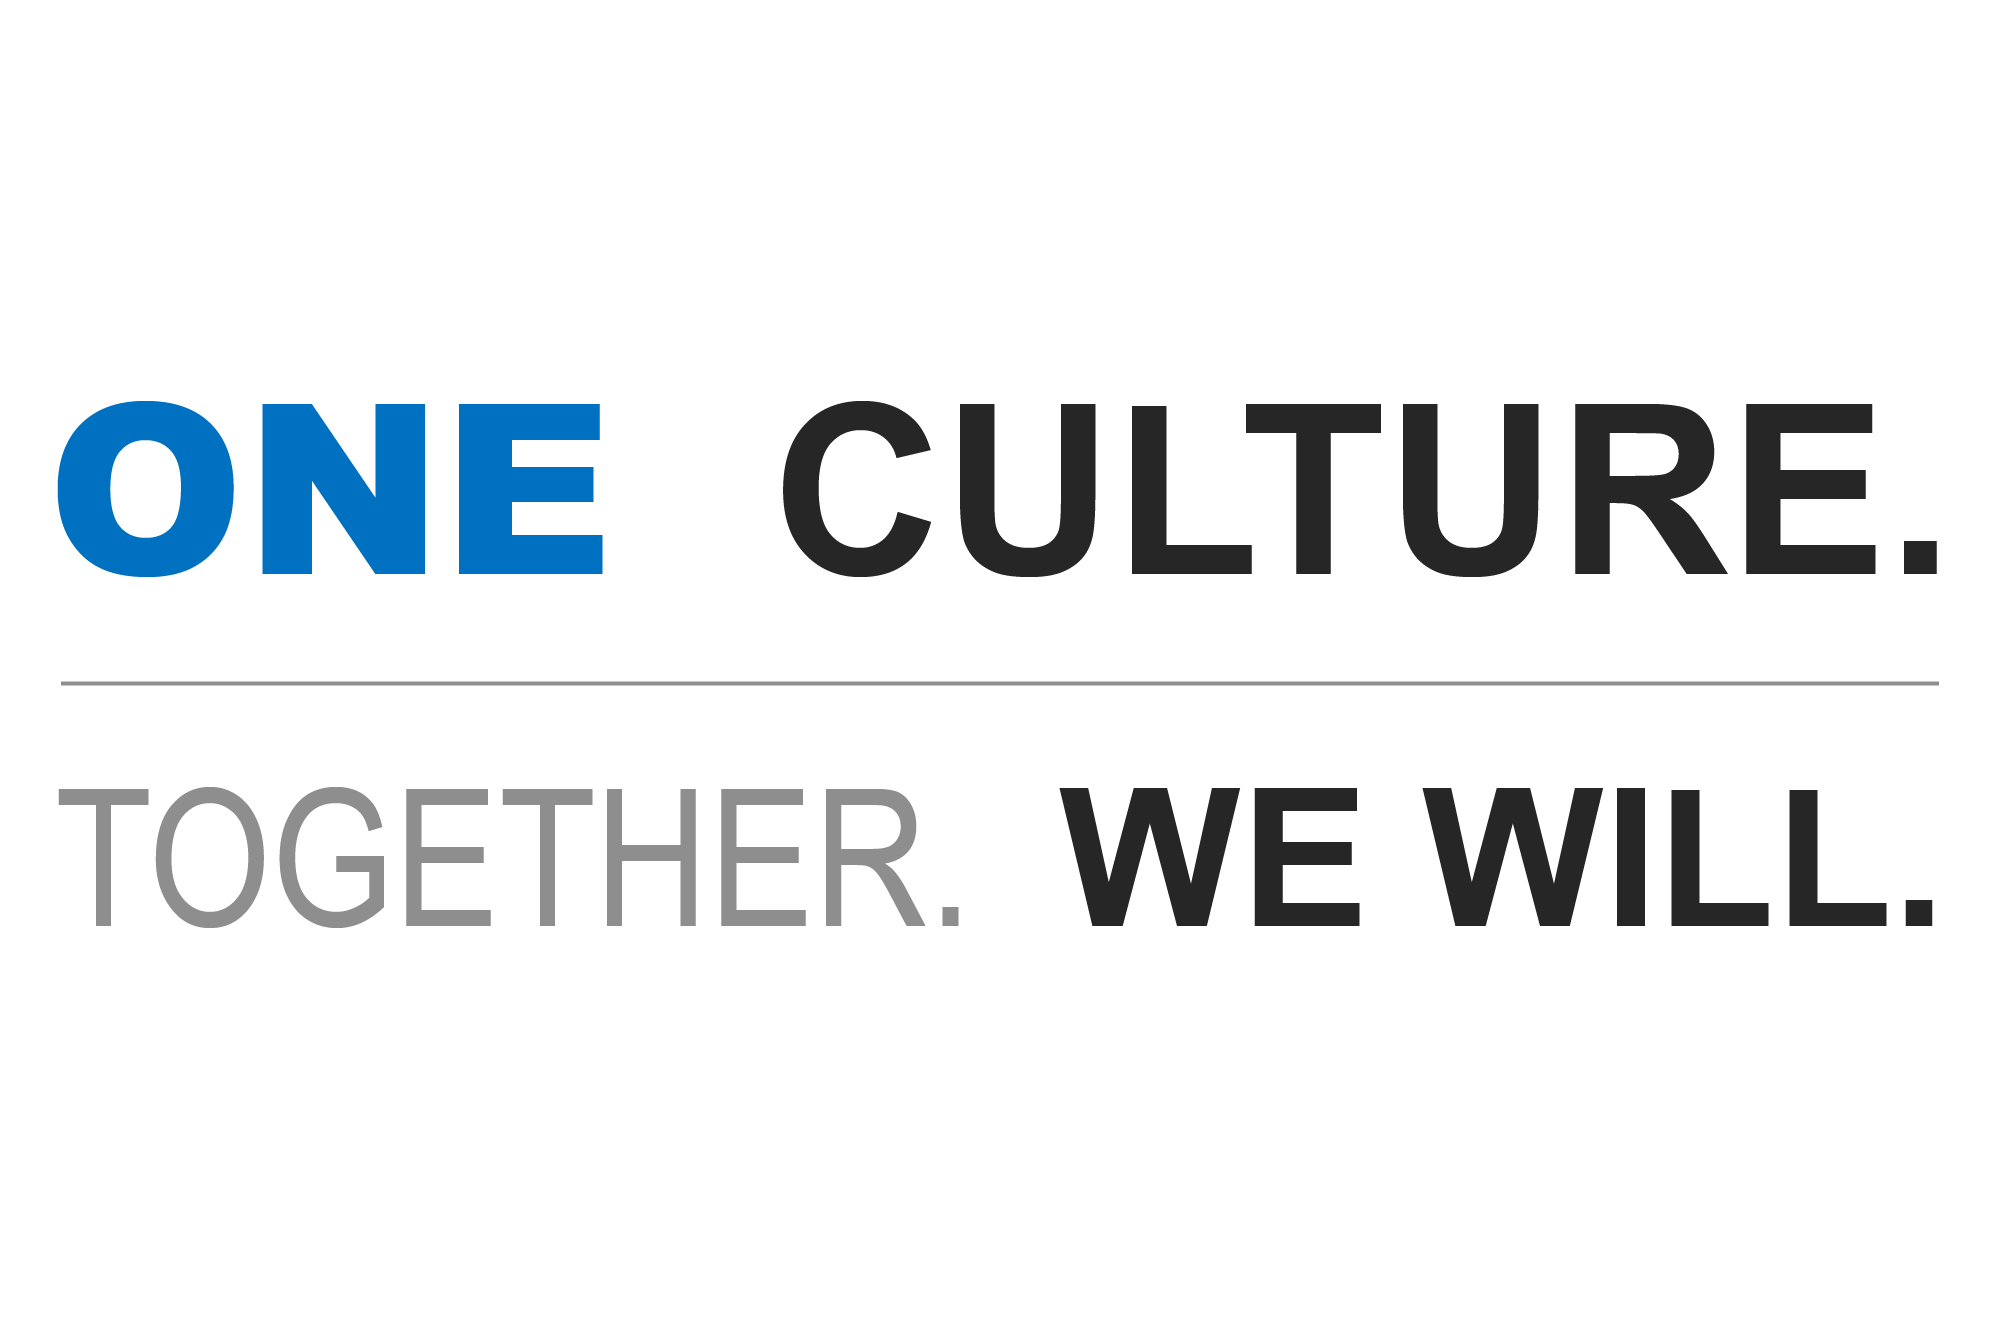 One Culture. Together We Will.